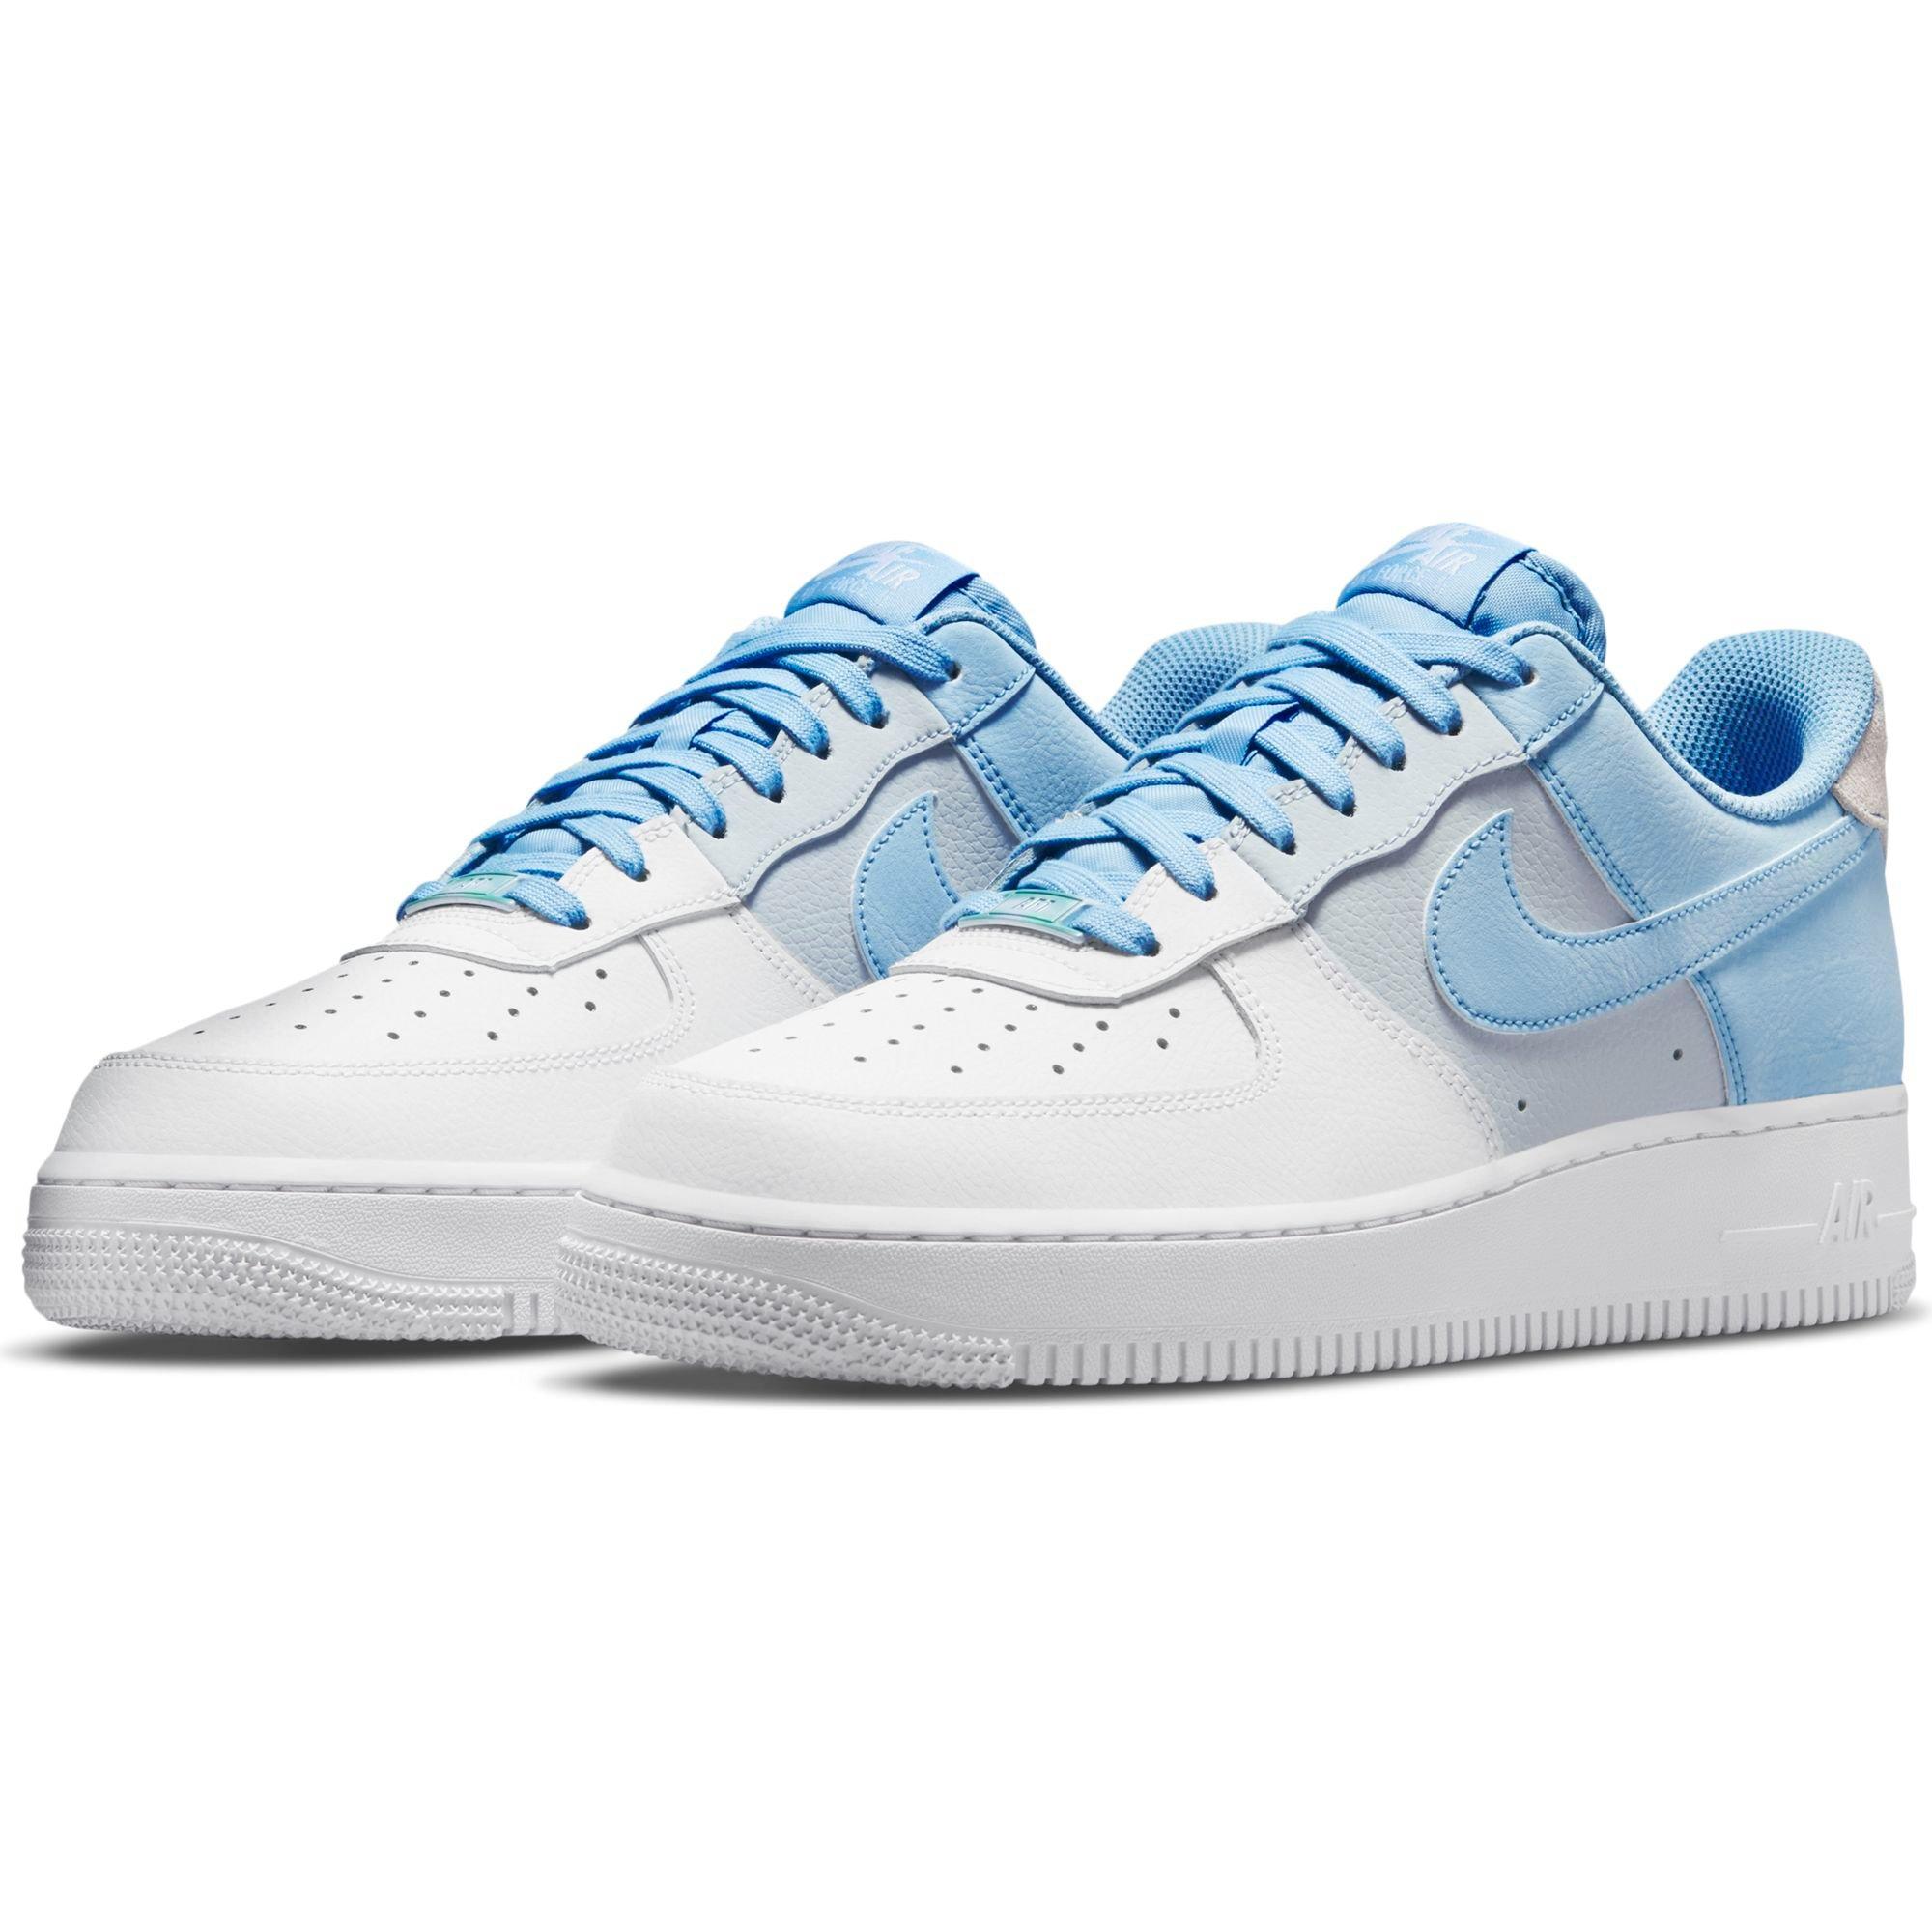 What does “07 LV8” mean in Nike Air Force 1 shoes? - Quora